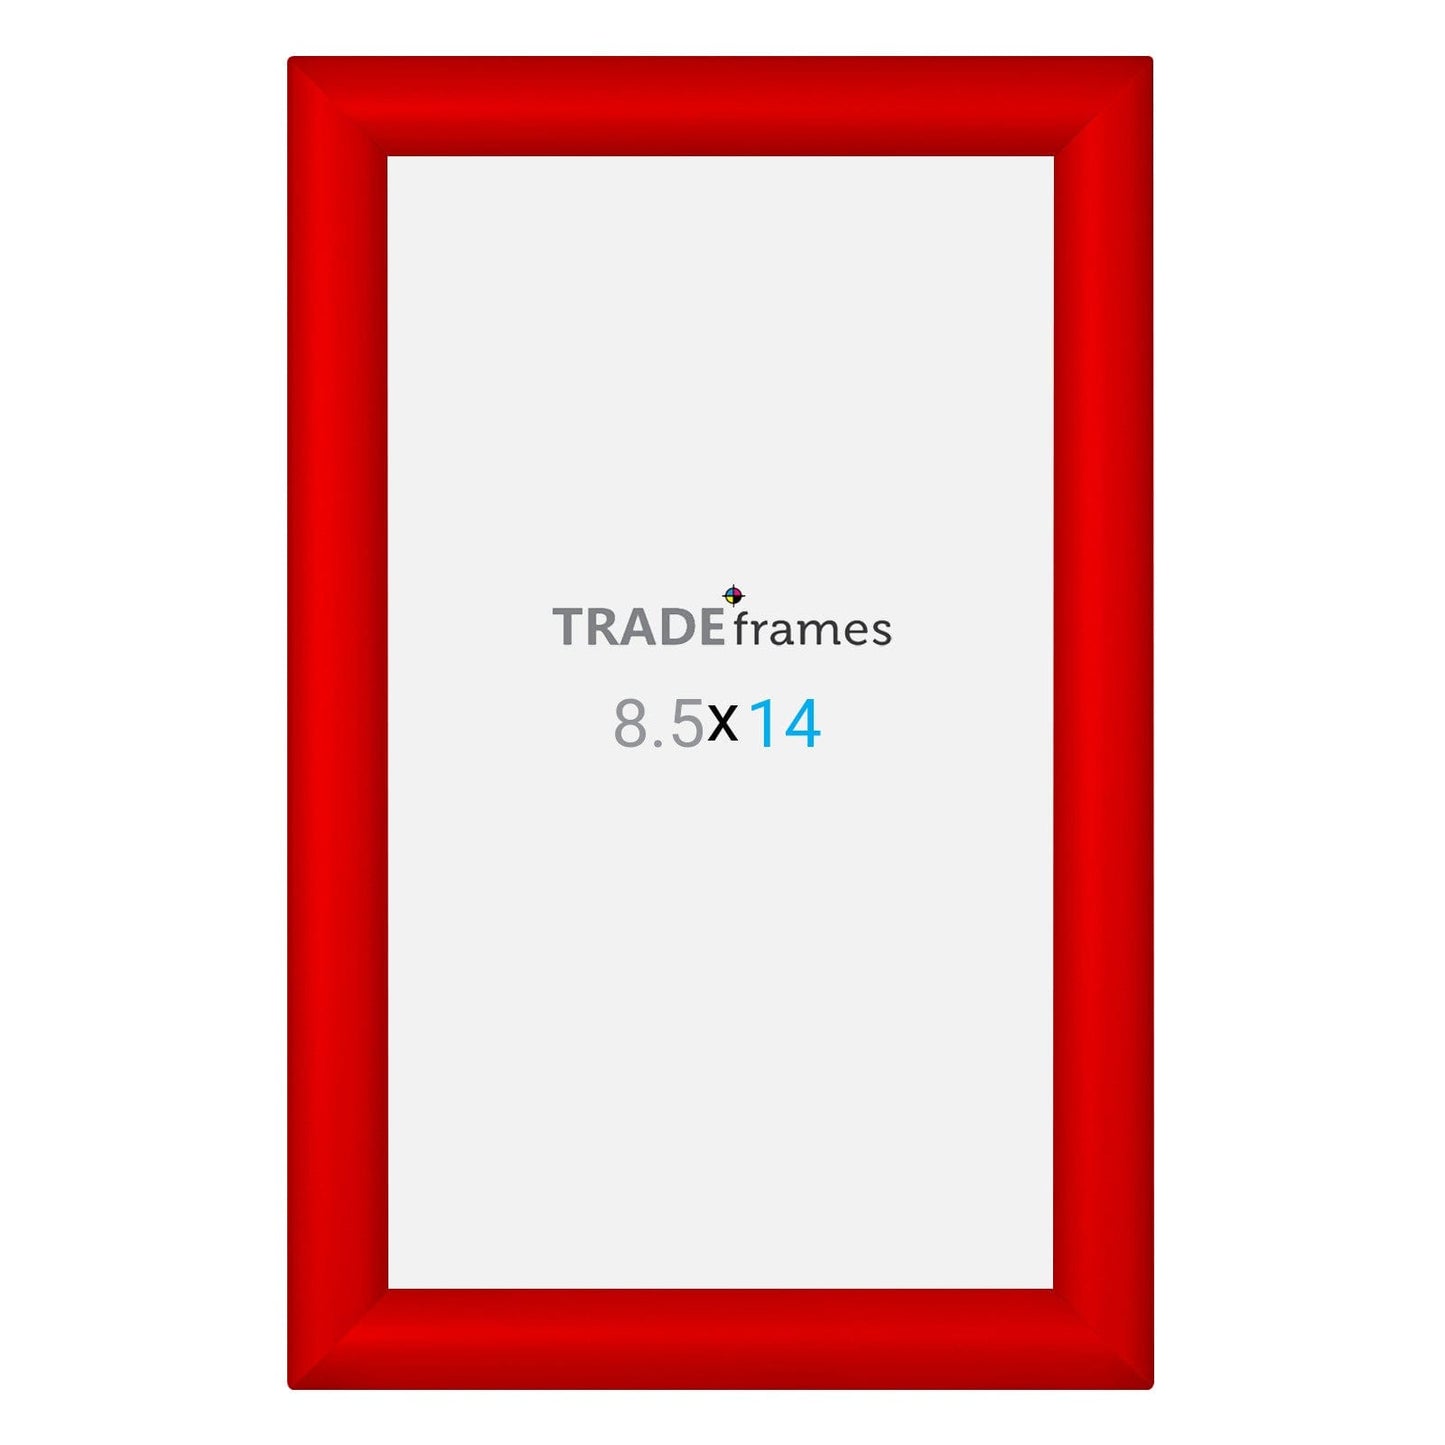 8.5x14 TRADEframe Red Snap Frame 8.5x14 - 1.2 inch profile - Snap Frames Direct